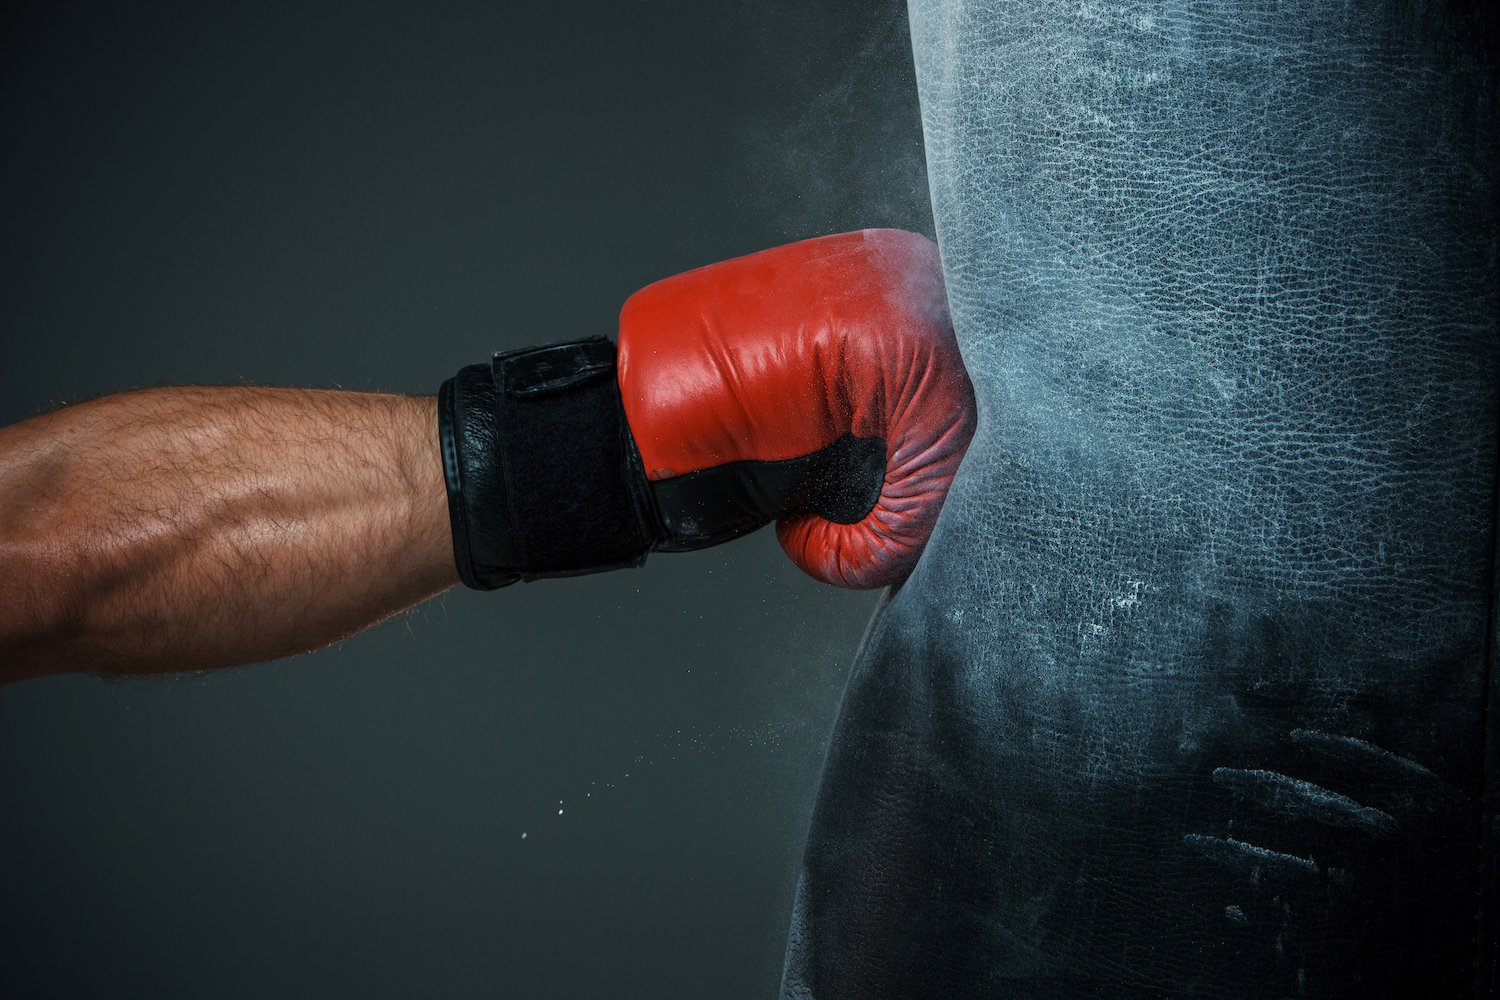 Regulators Are Landing Punches, But There’s A Long Crypto Fight Ahead